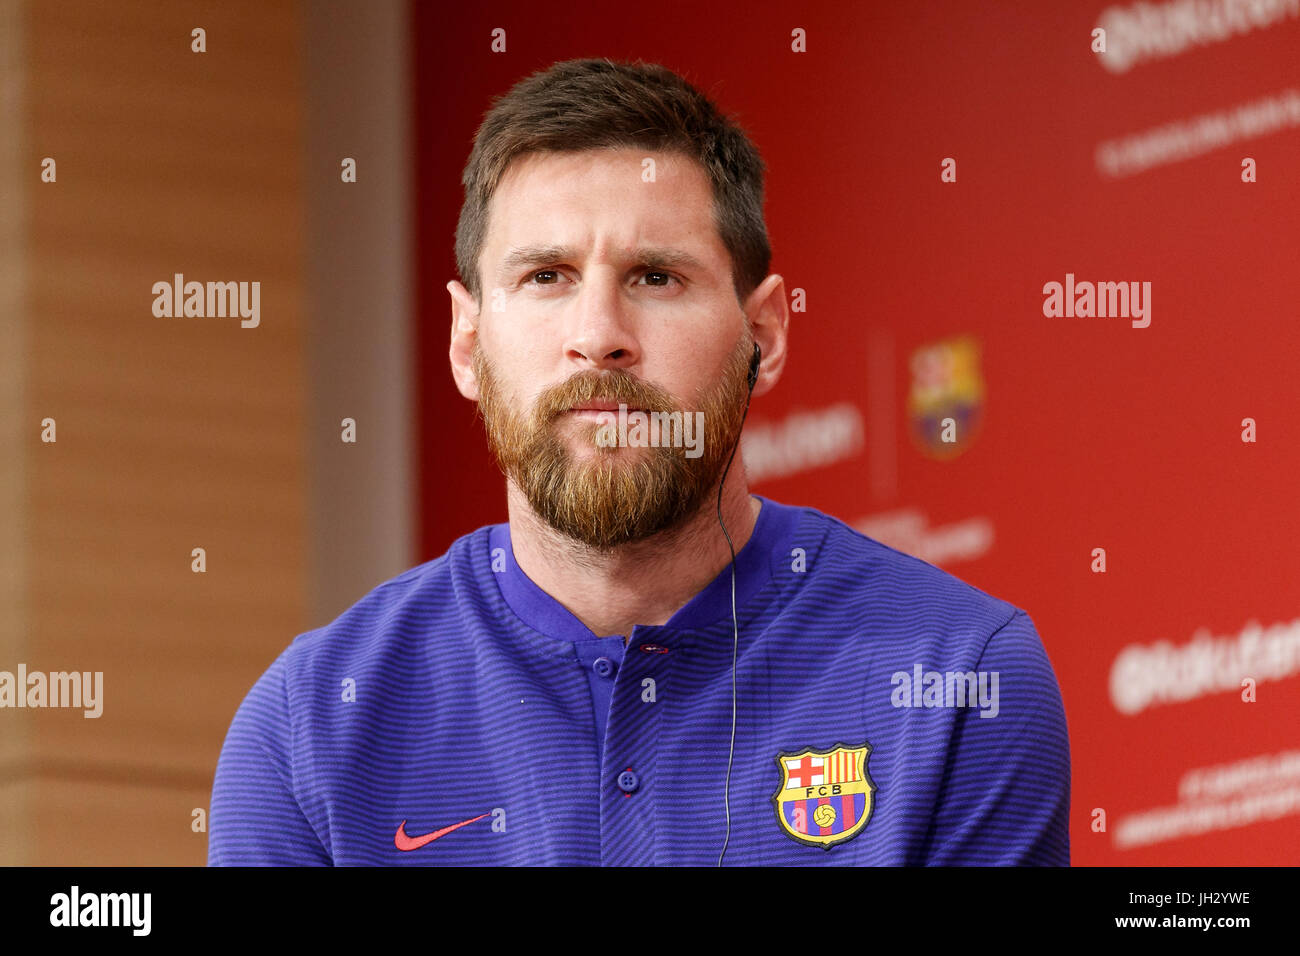 FC Barcelona player Lionel Messi attends a press event at Rakuten Crimson House headquarters in Setagaya on July 13, 2017, Tokyo, Japan. The Barcelona stars visited the Tokyo headquarters of Rakuten, FC Barcelona's new Main Global Partner. The Japanese e-commerce firm Rakuten is the new sponsor of the Spanish soccer club, replacing Qatar Airways, for the next four seasons. Credit: Rodrigo Reyes Marin/AFLO/Alamy Live News Stock Photo